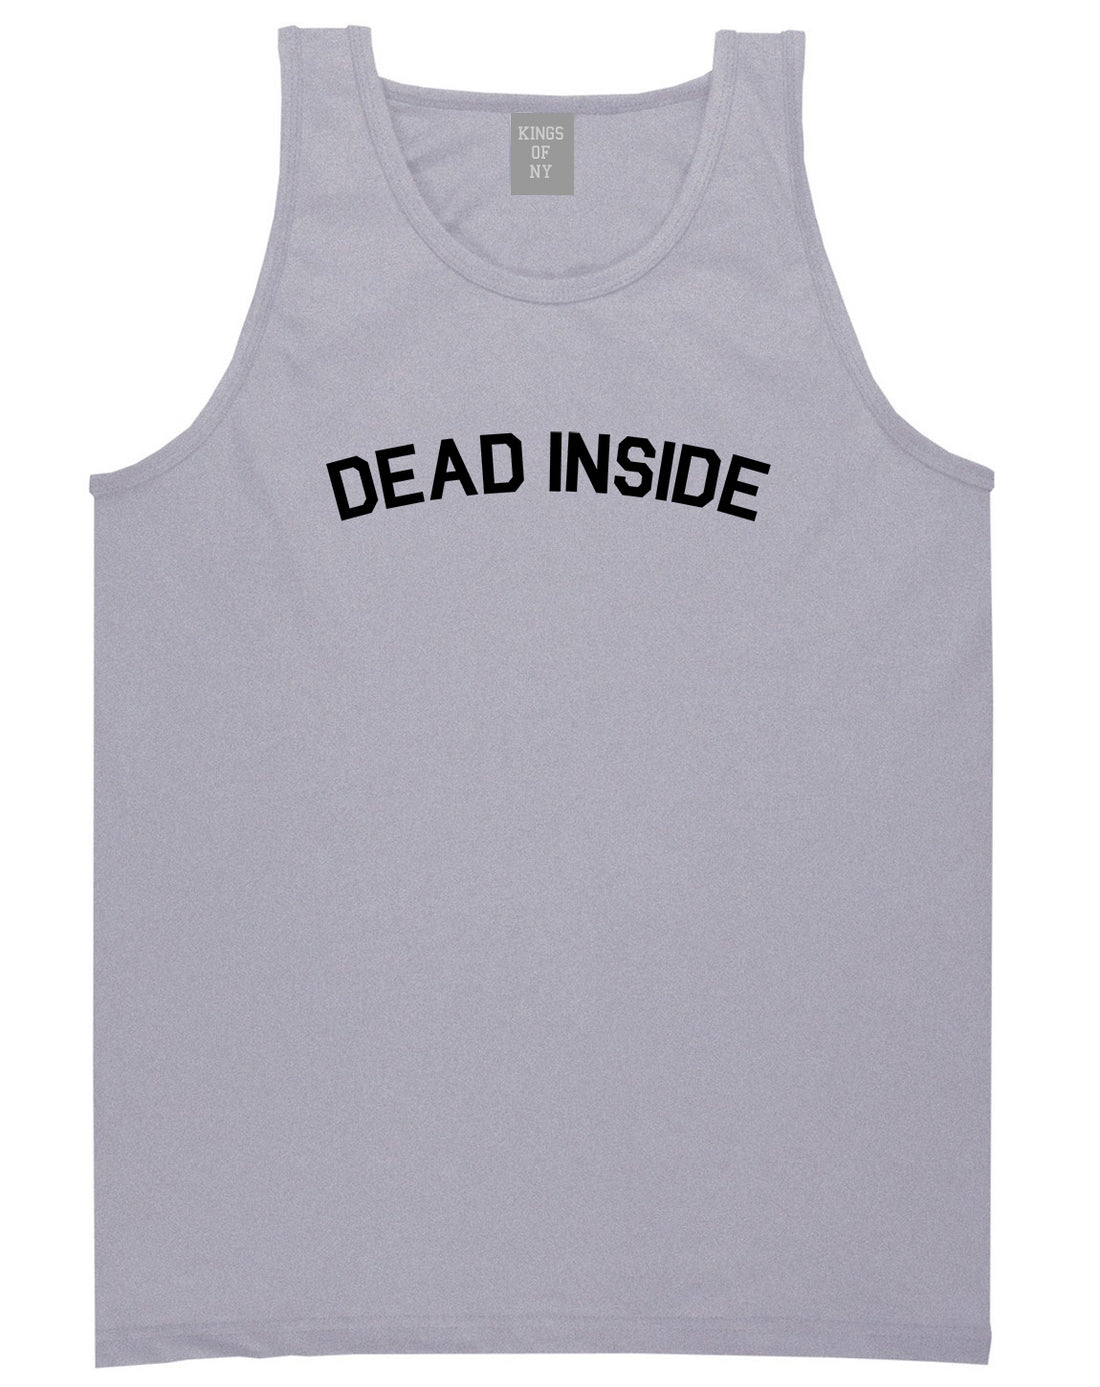 Dead Inside Arch Mens Tank Top Shirt Grey by Kings Of NY